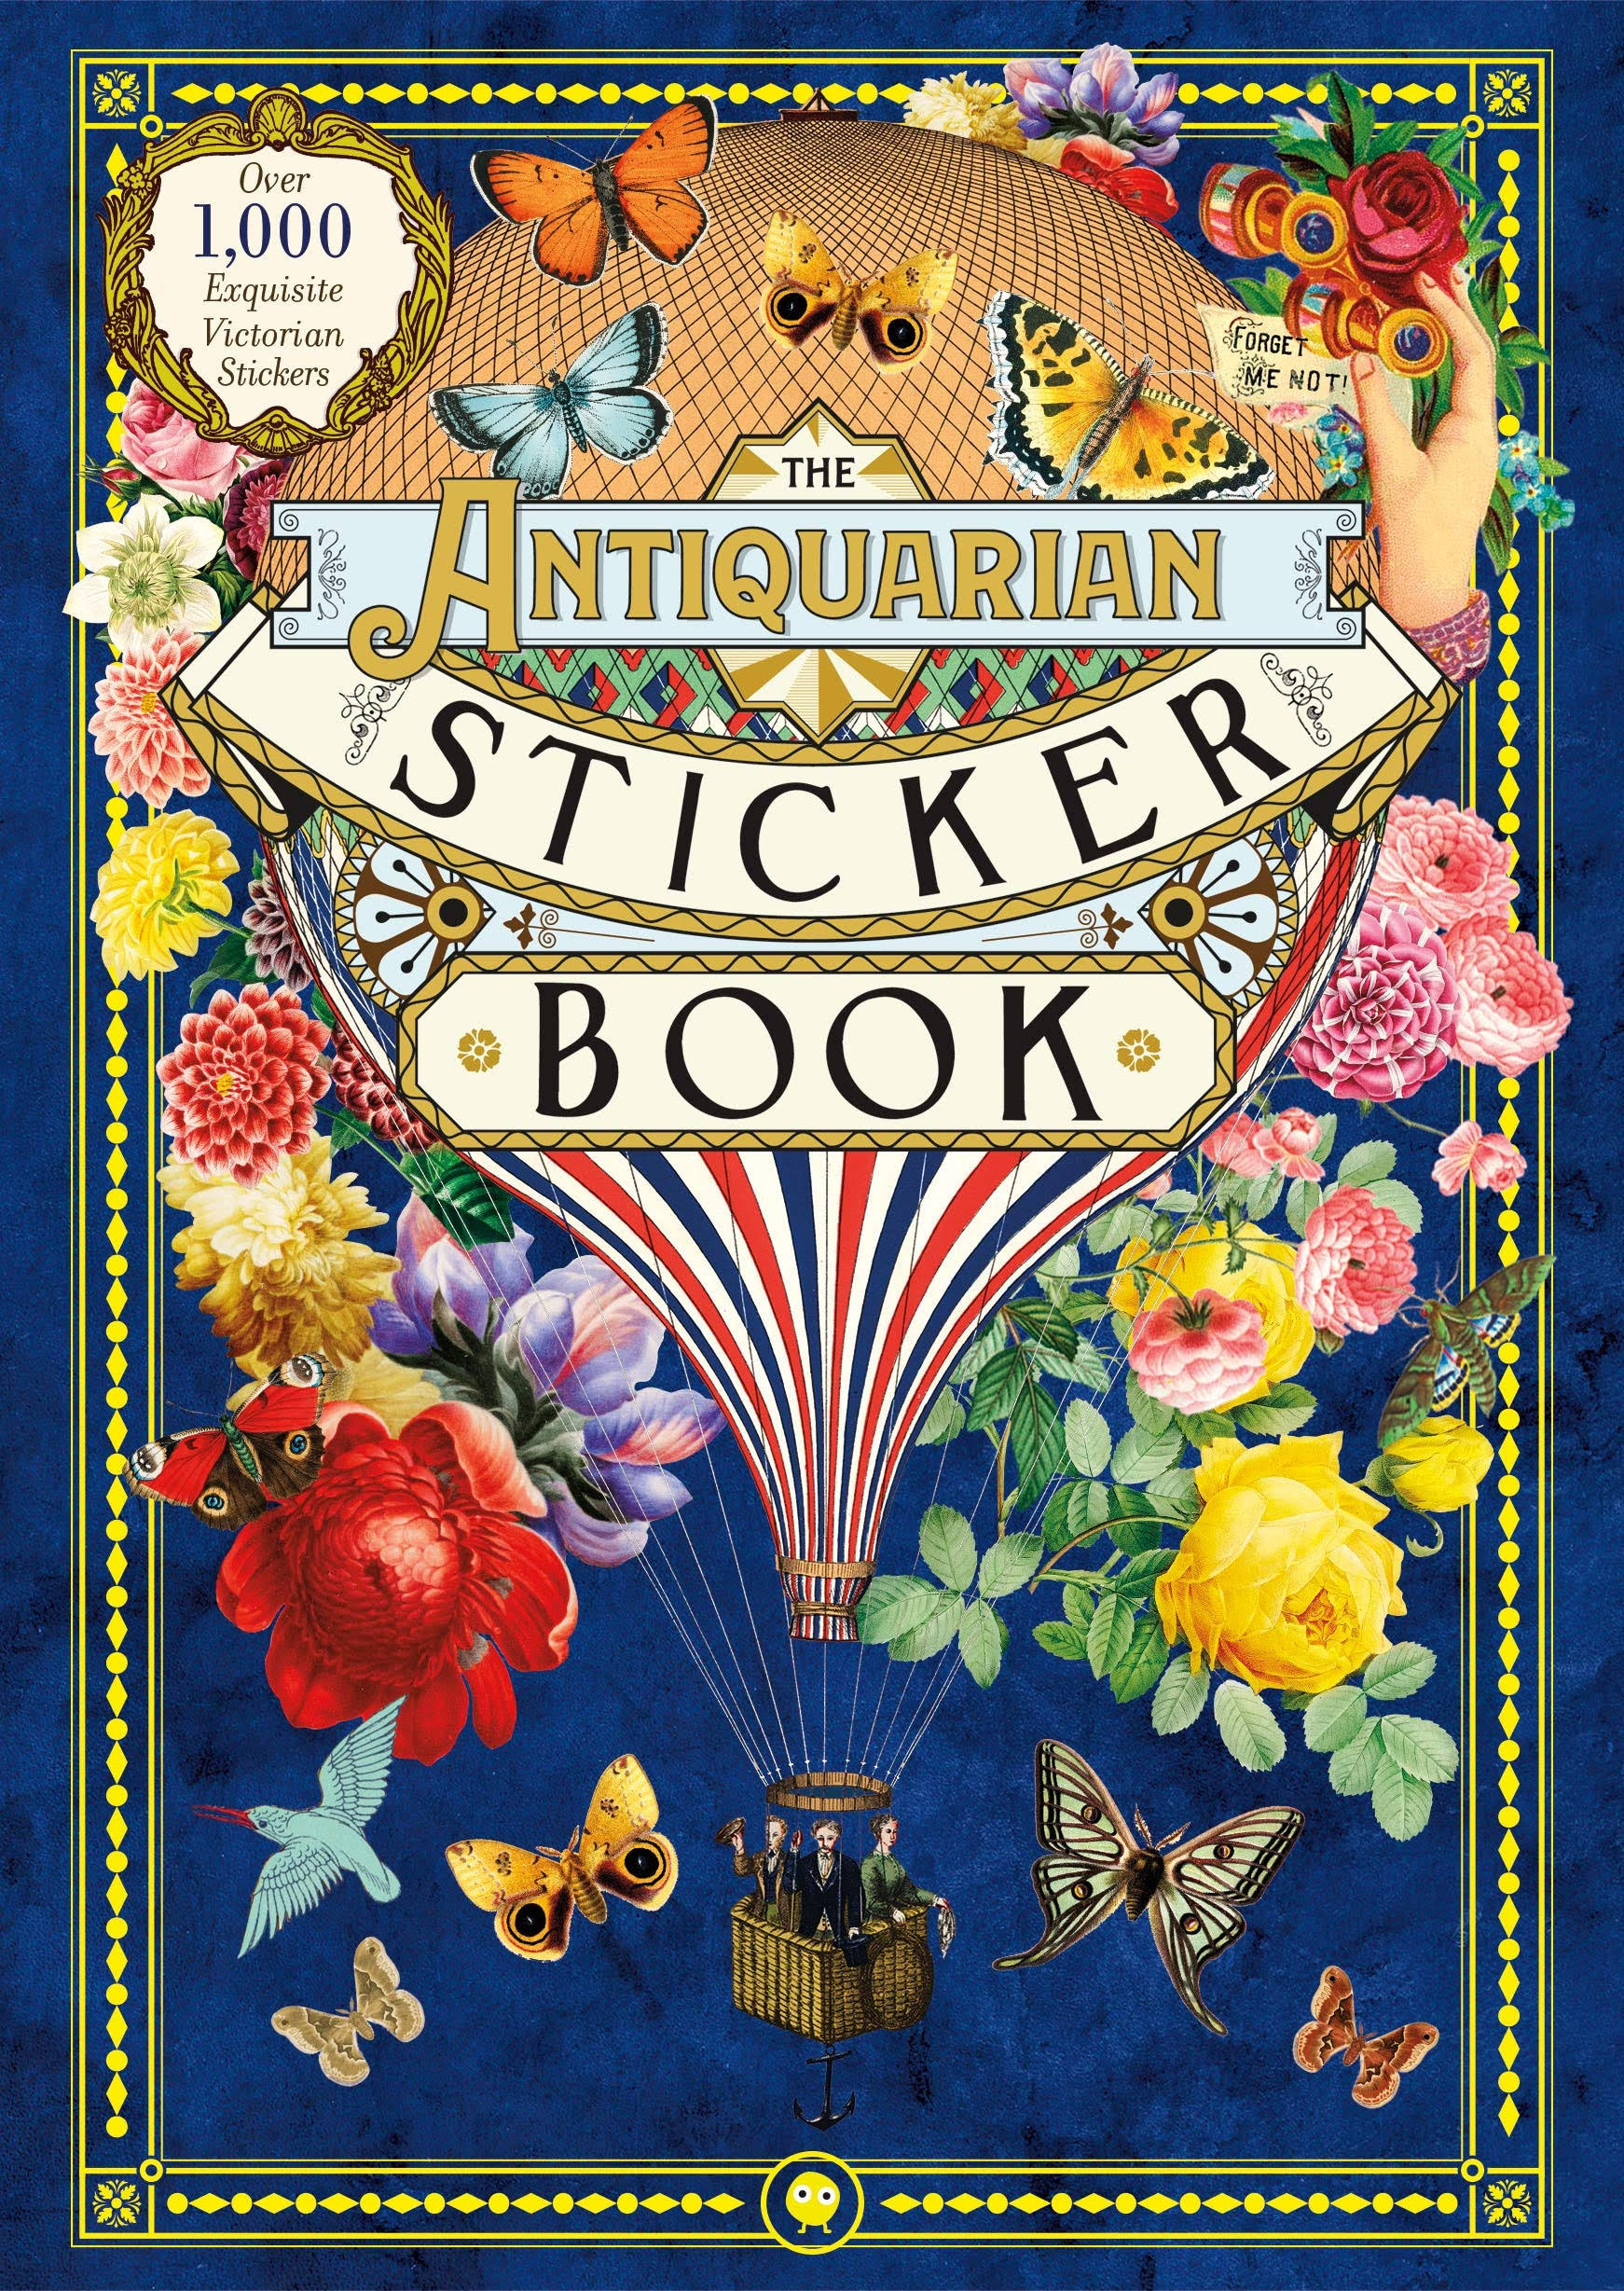 The Antiquarian Sticker Book: Over 1,000 Exquisite Victorian Stickers [Book]